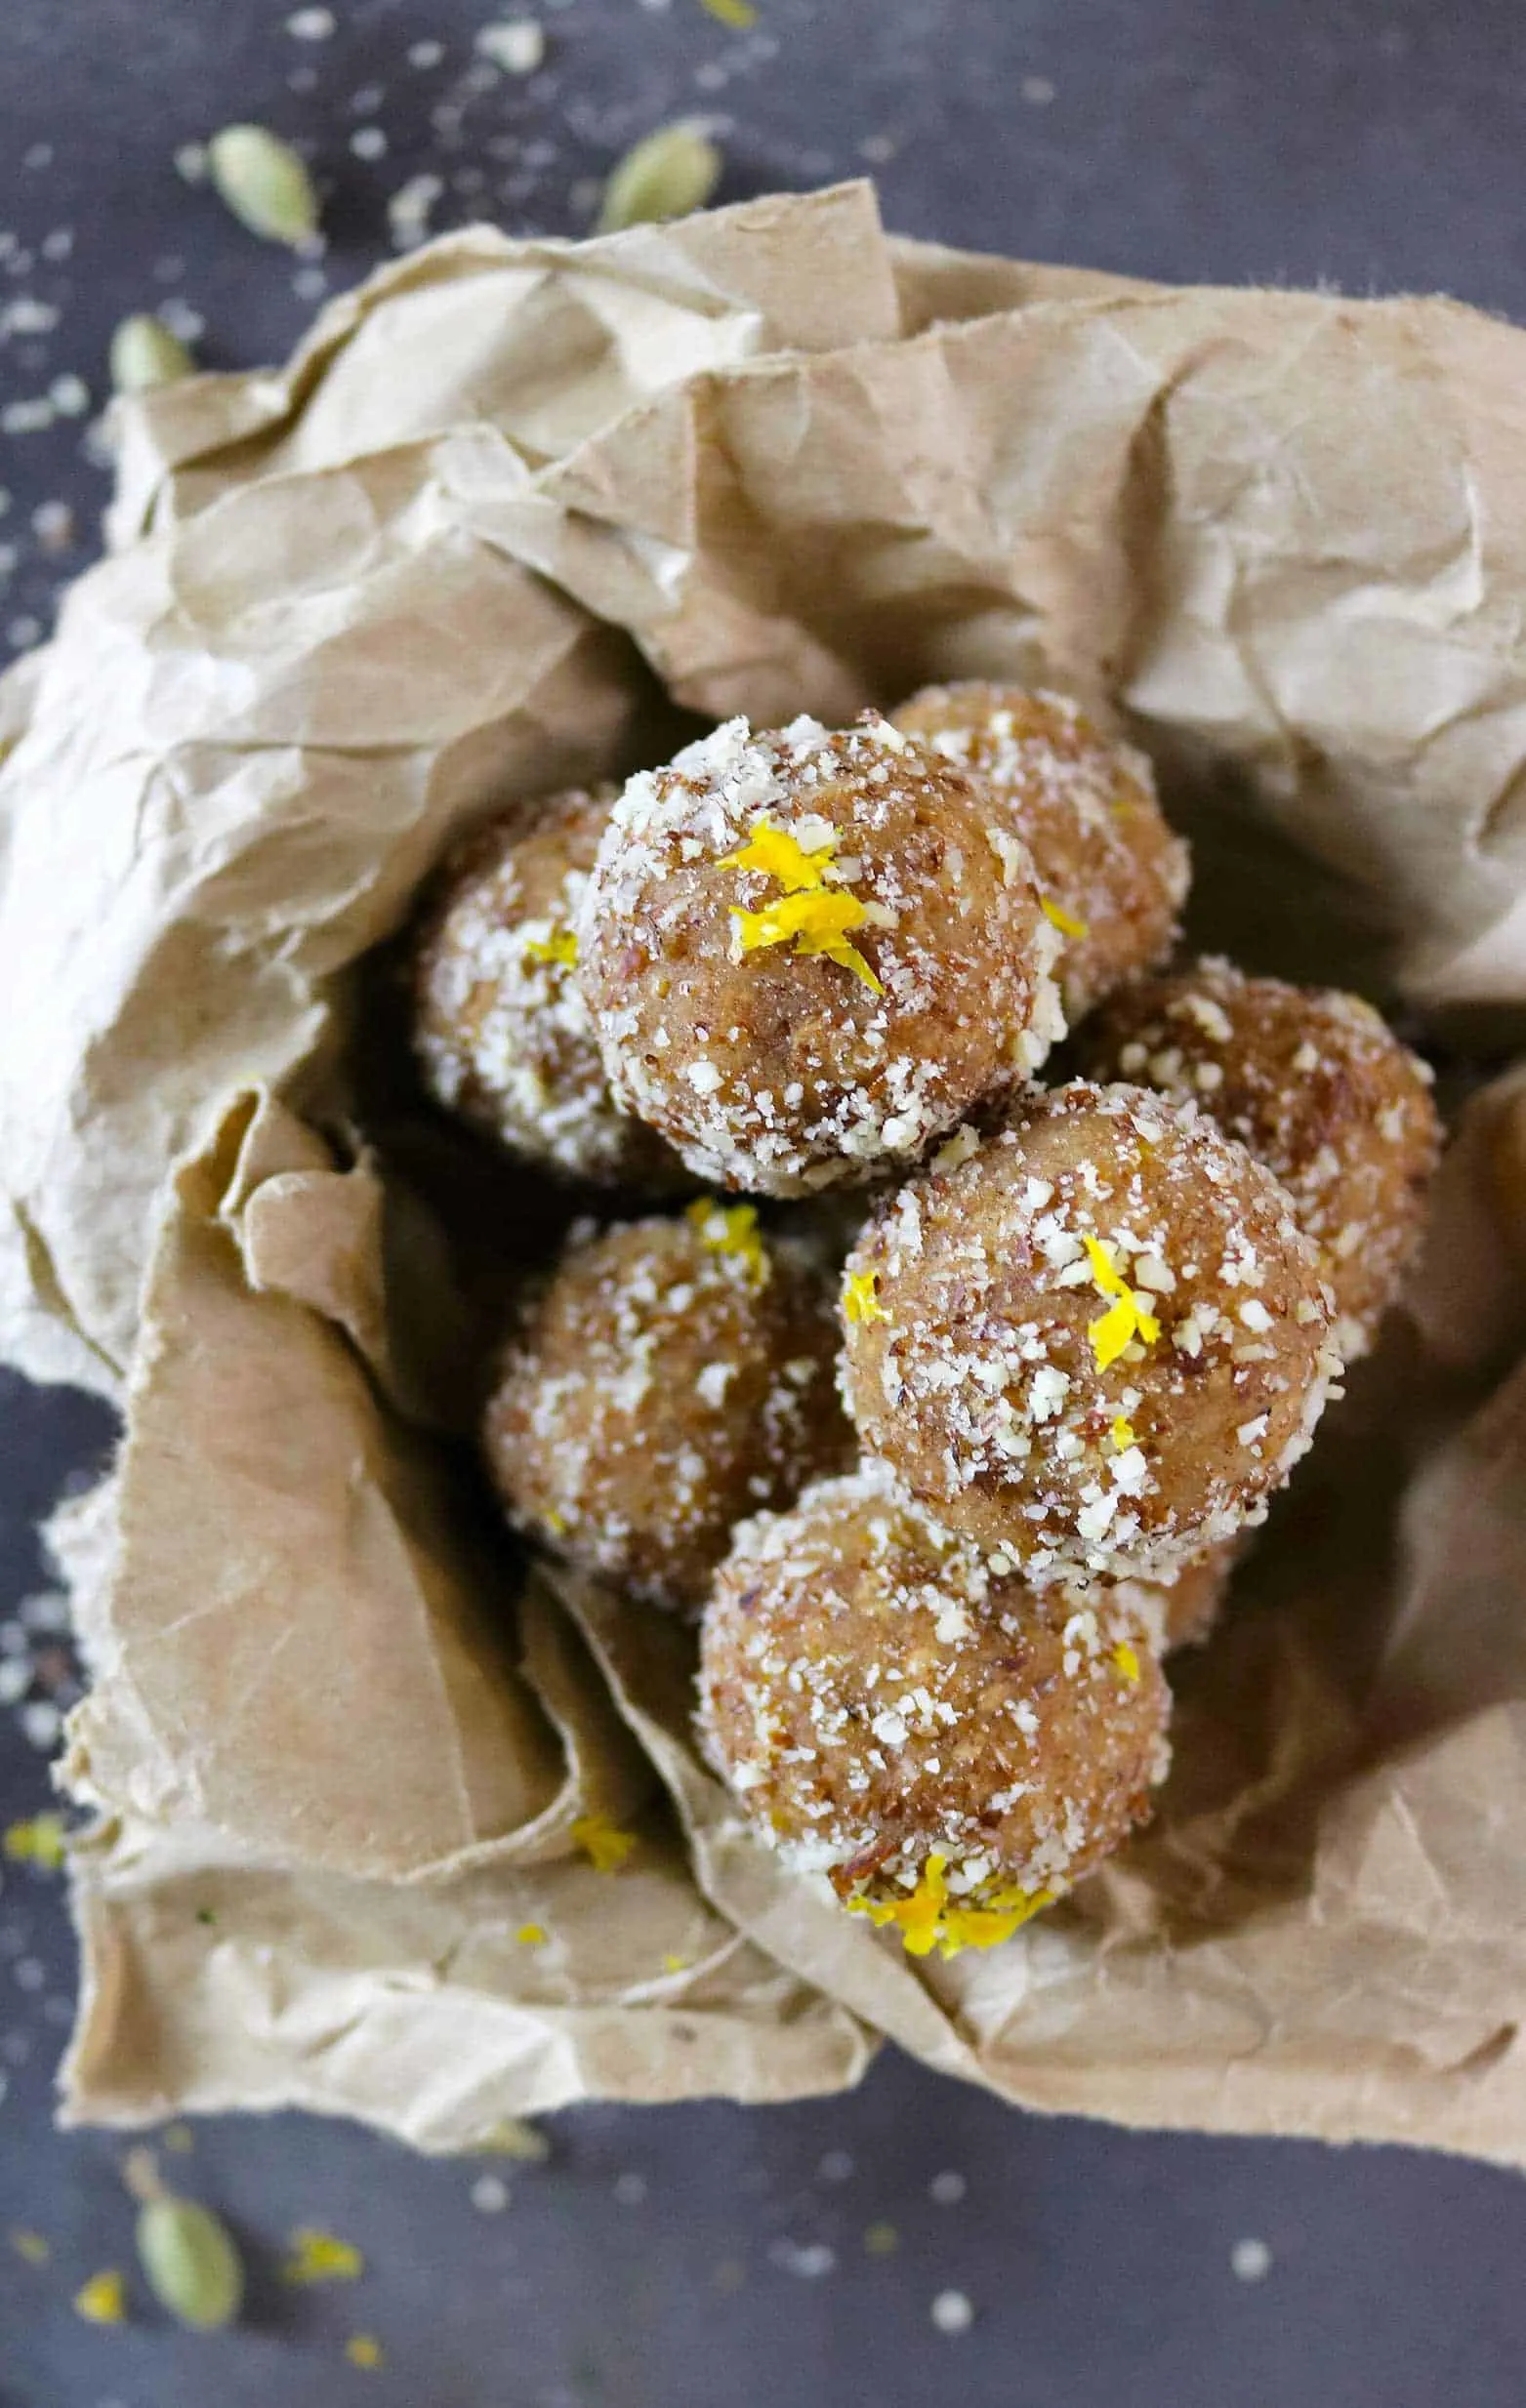 These Orange Cardamom Bites are gluten-free, dairy-free, and refined sugar-free are a wonderful no-bake. energizing snack - Recipe at RunninSrilankan.com